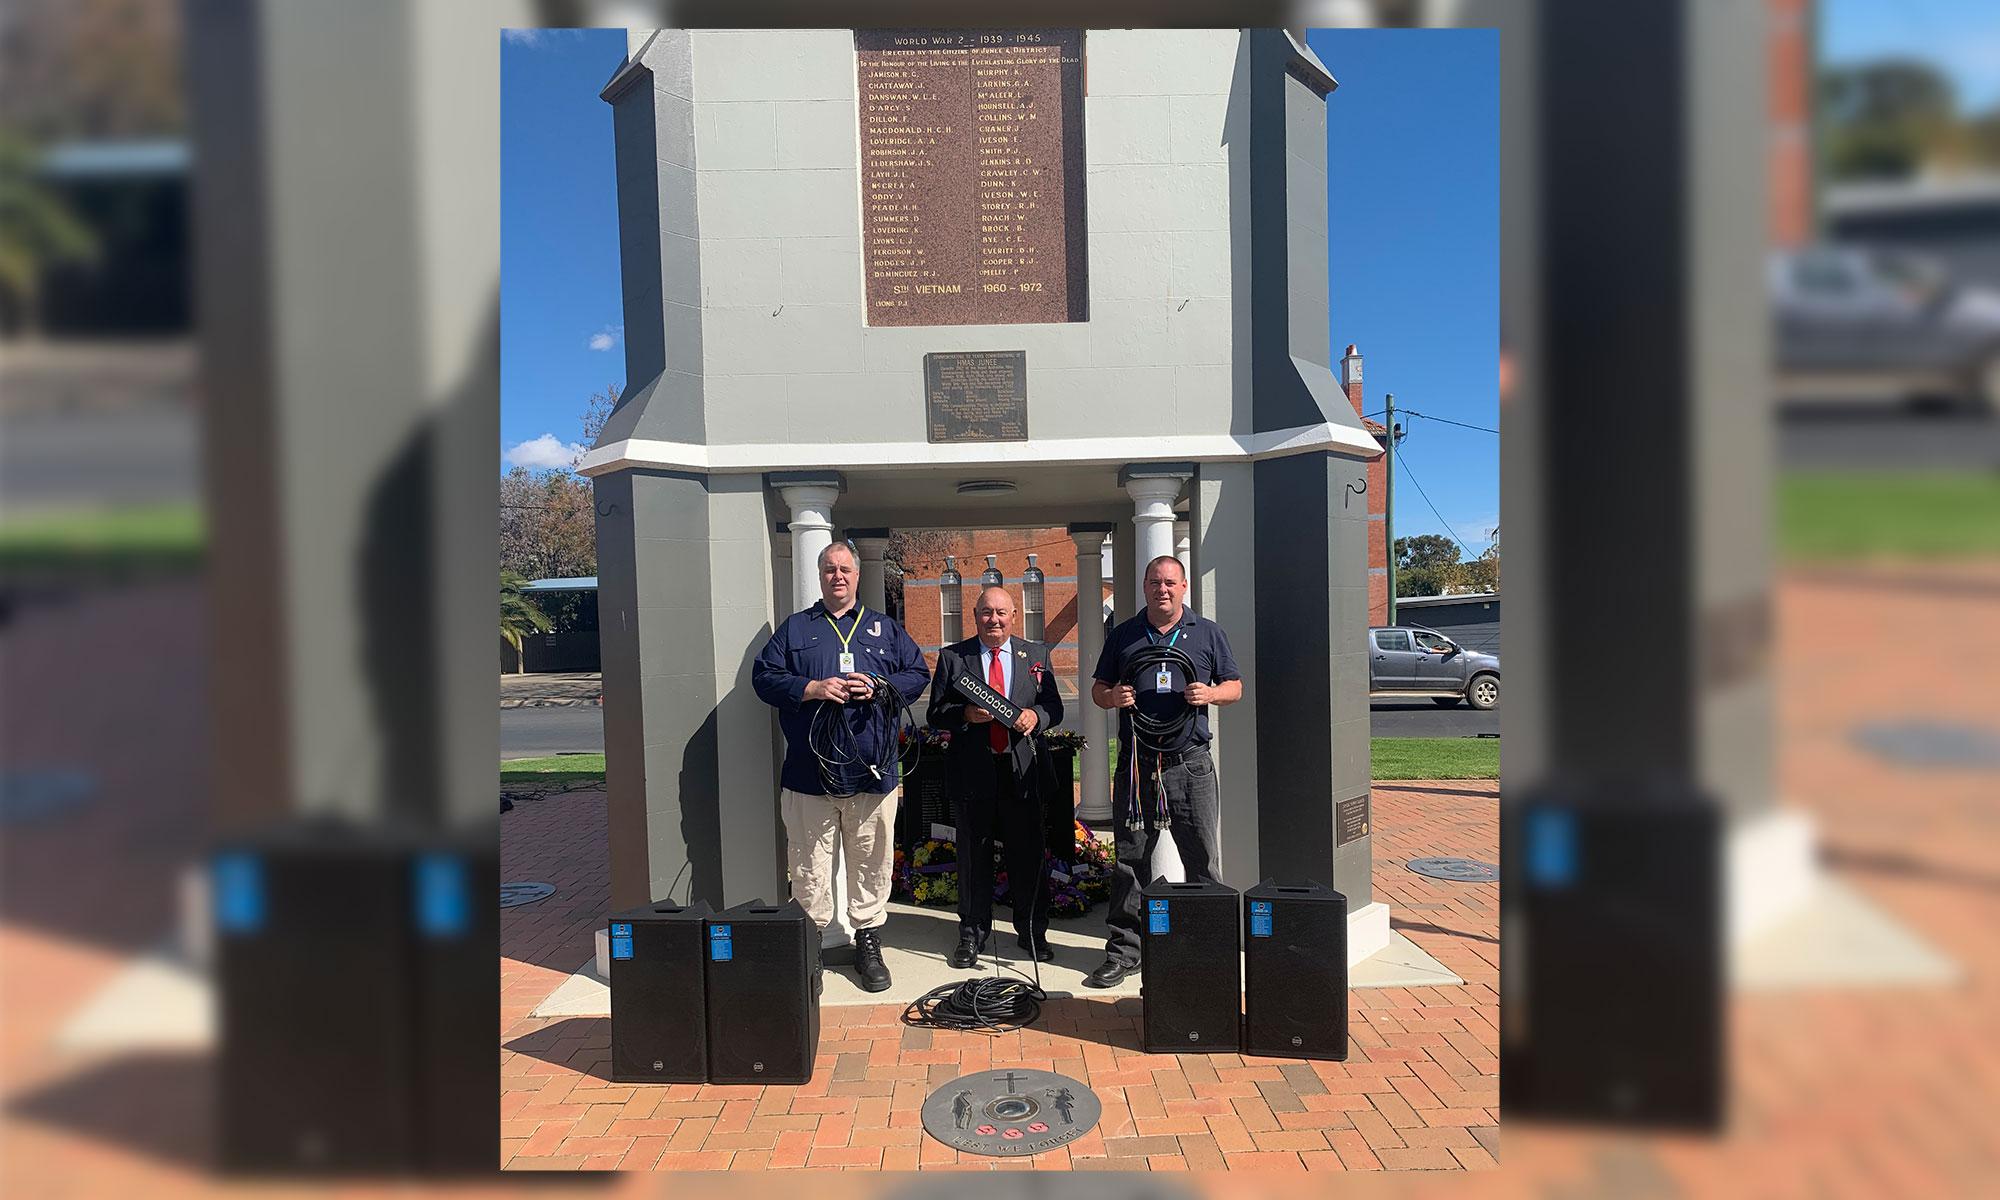 Junee RSL Sub-Branch’s Nicholas Pyers, grants officer, Greg Zakharoff, President, and David Johnson, audio visual technician, at the Junee Cenotaph with the new audio equipment